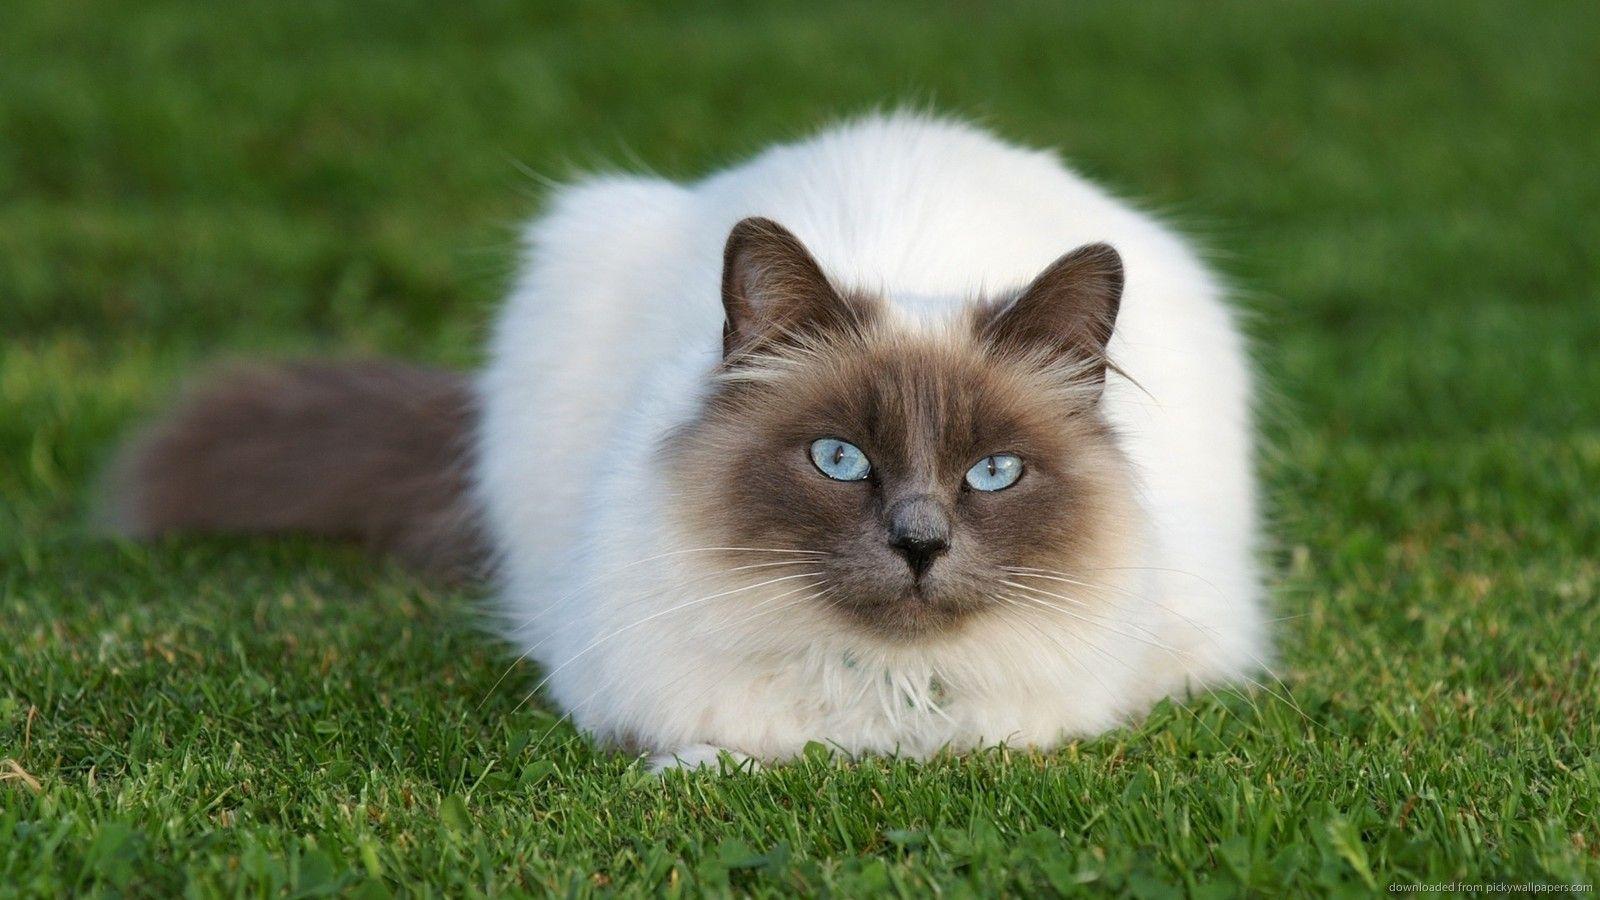 Download 1600x900 Siamese Cat On A Lawn Wallpaper